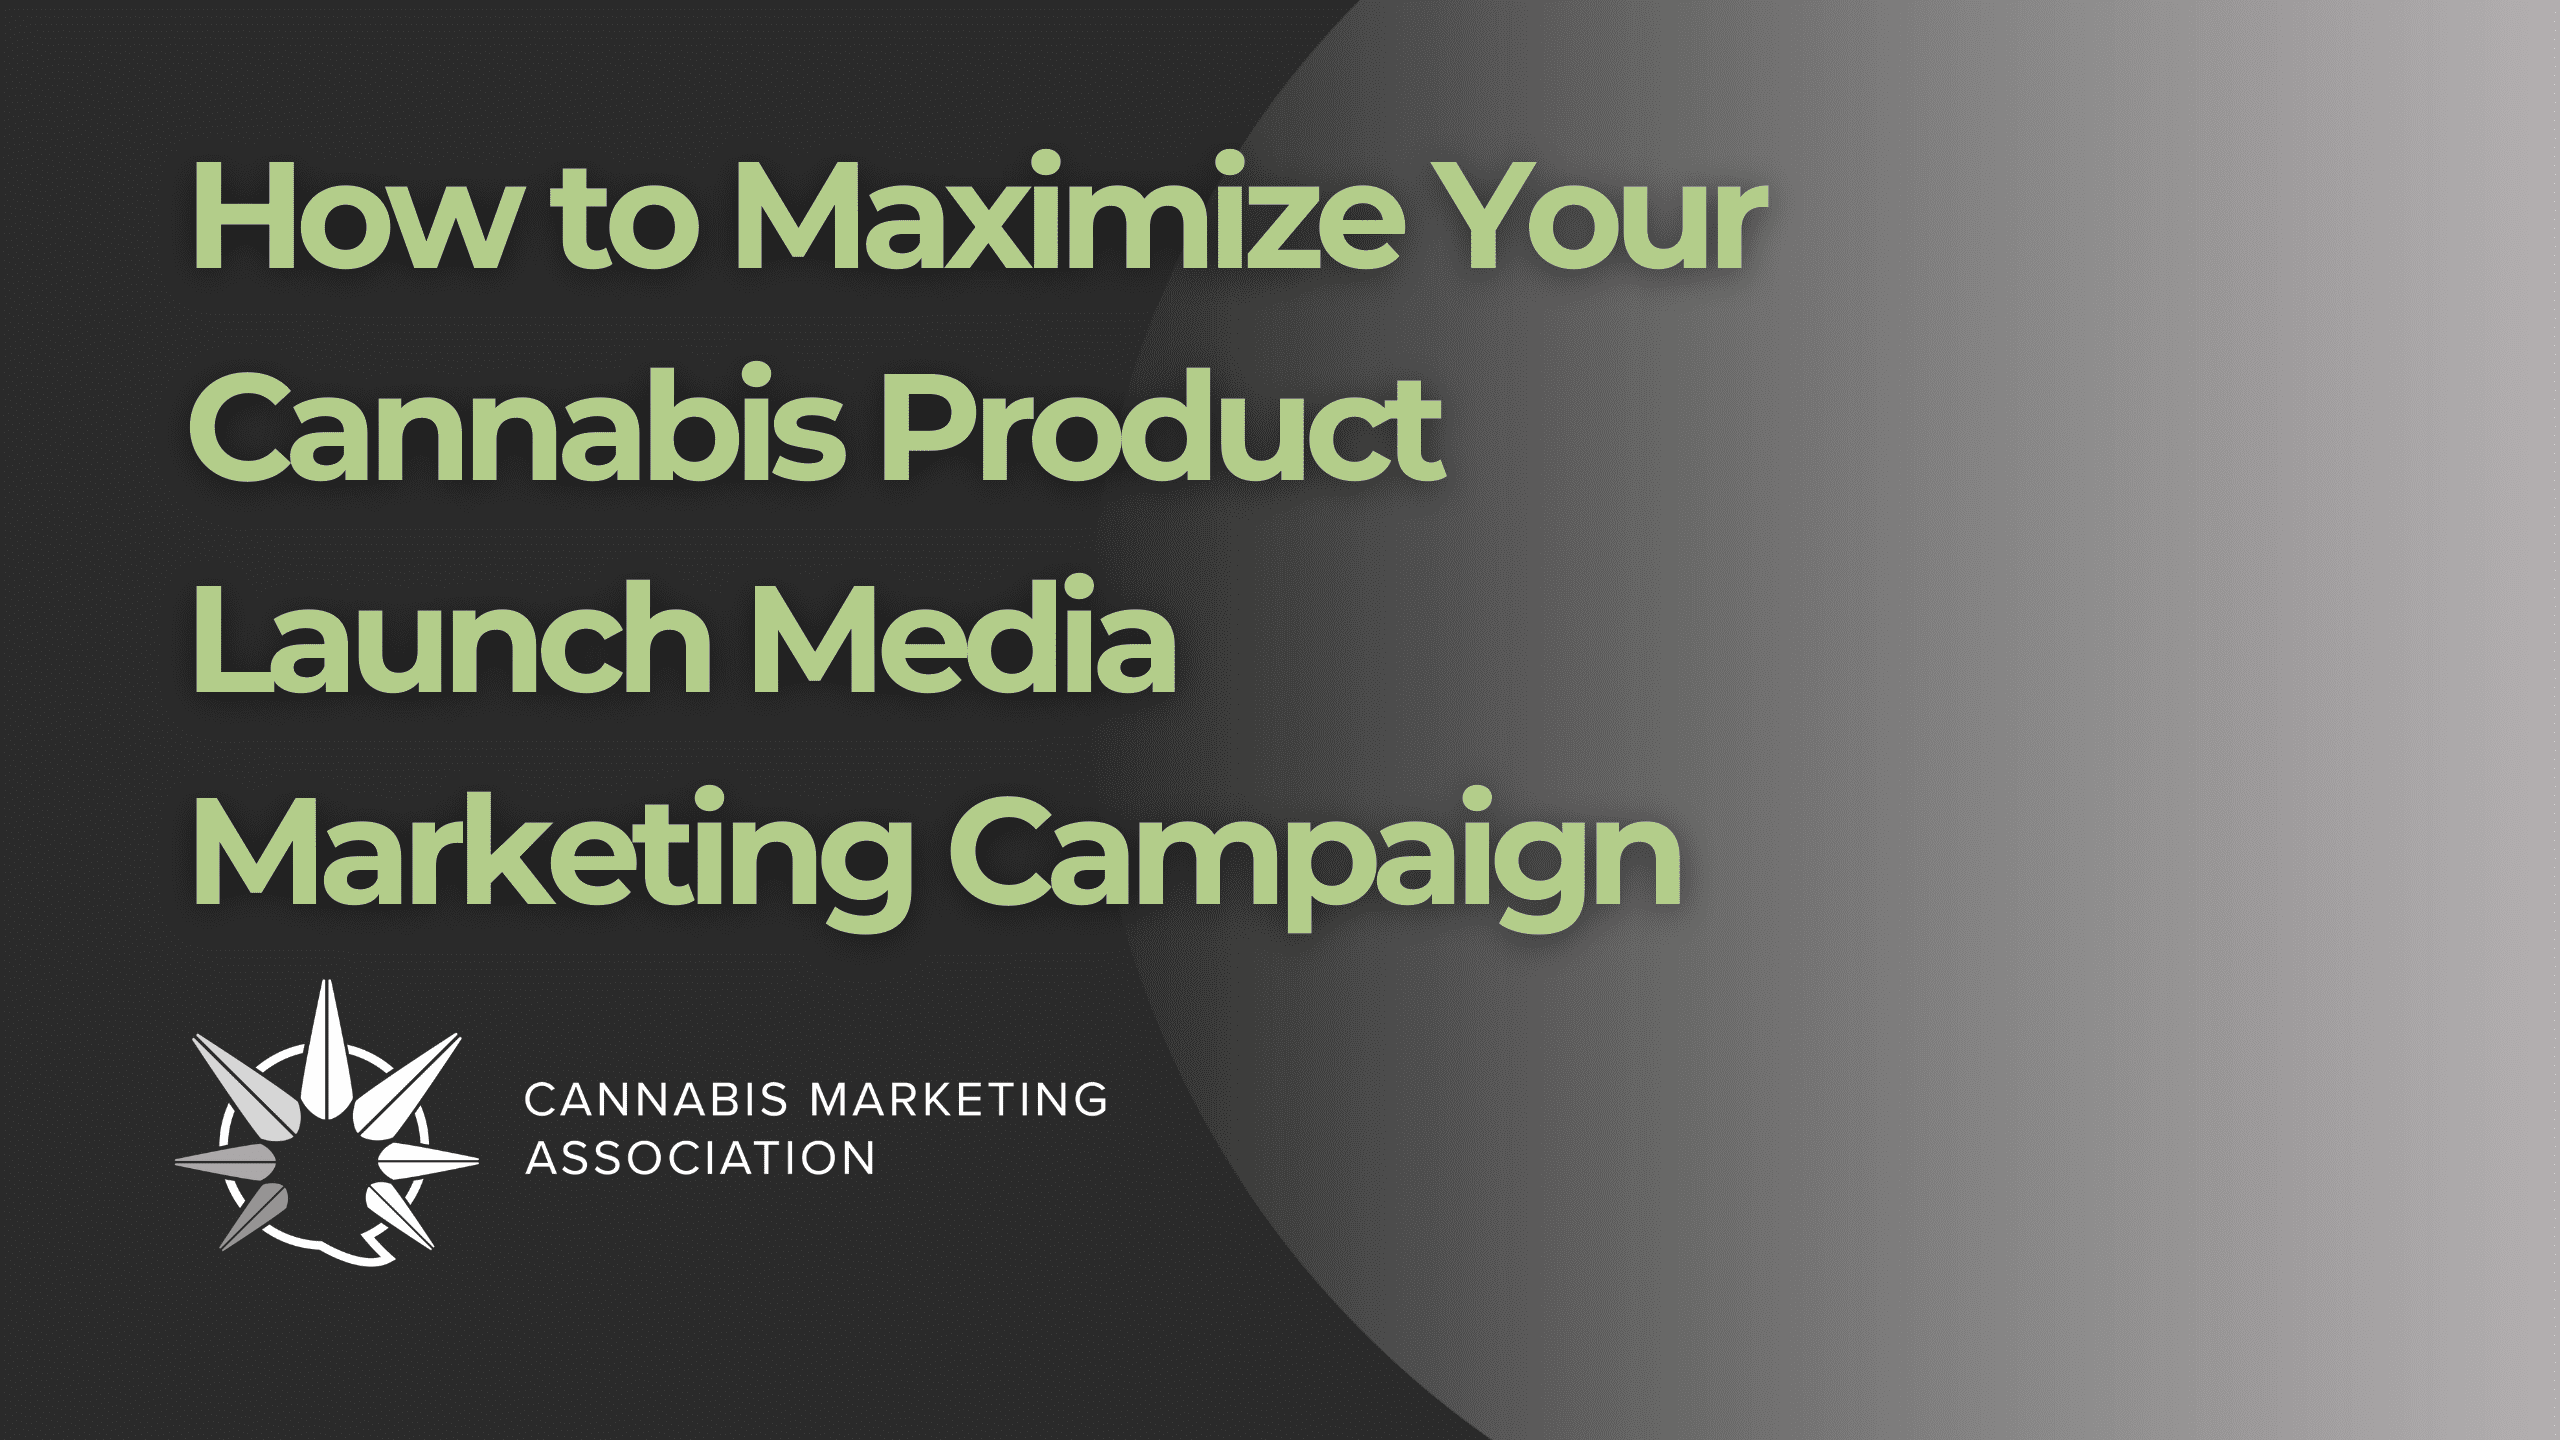 How to Maximize Your Cannabis Product Launch Media Marketing Campaign